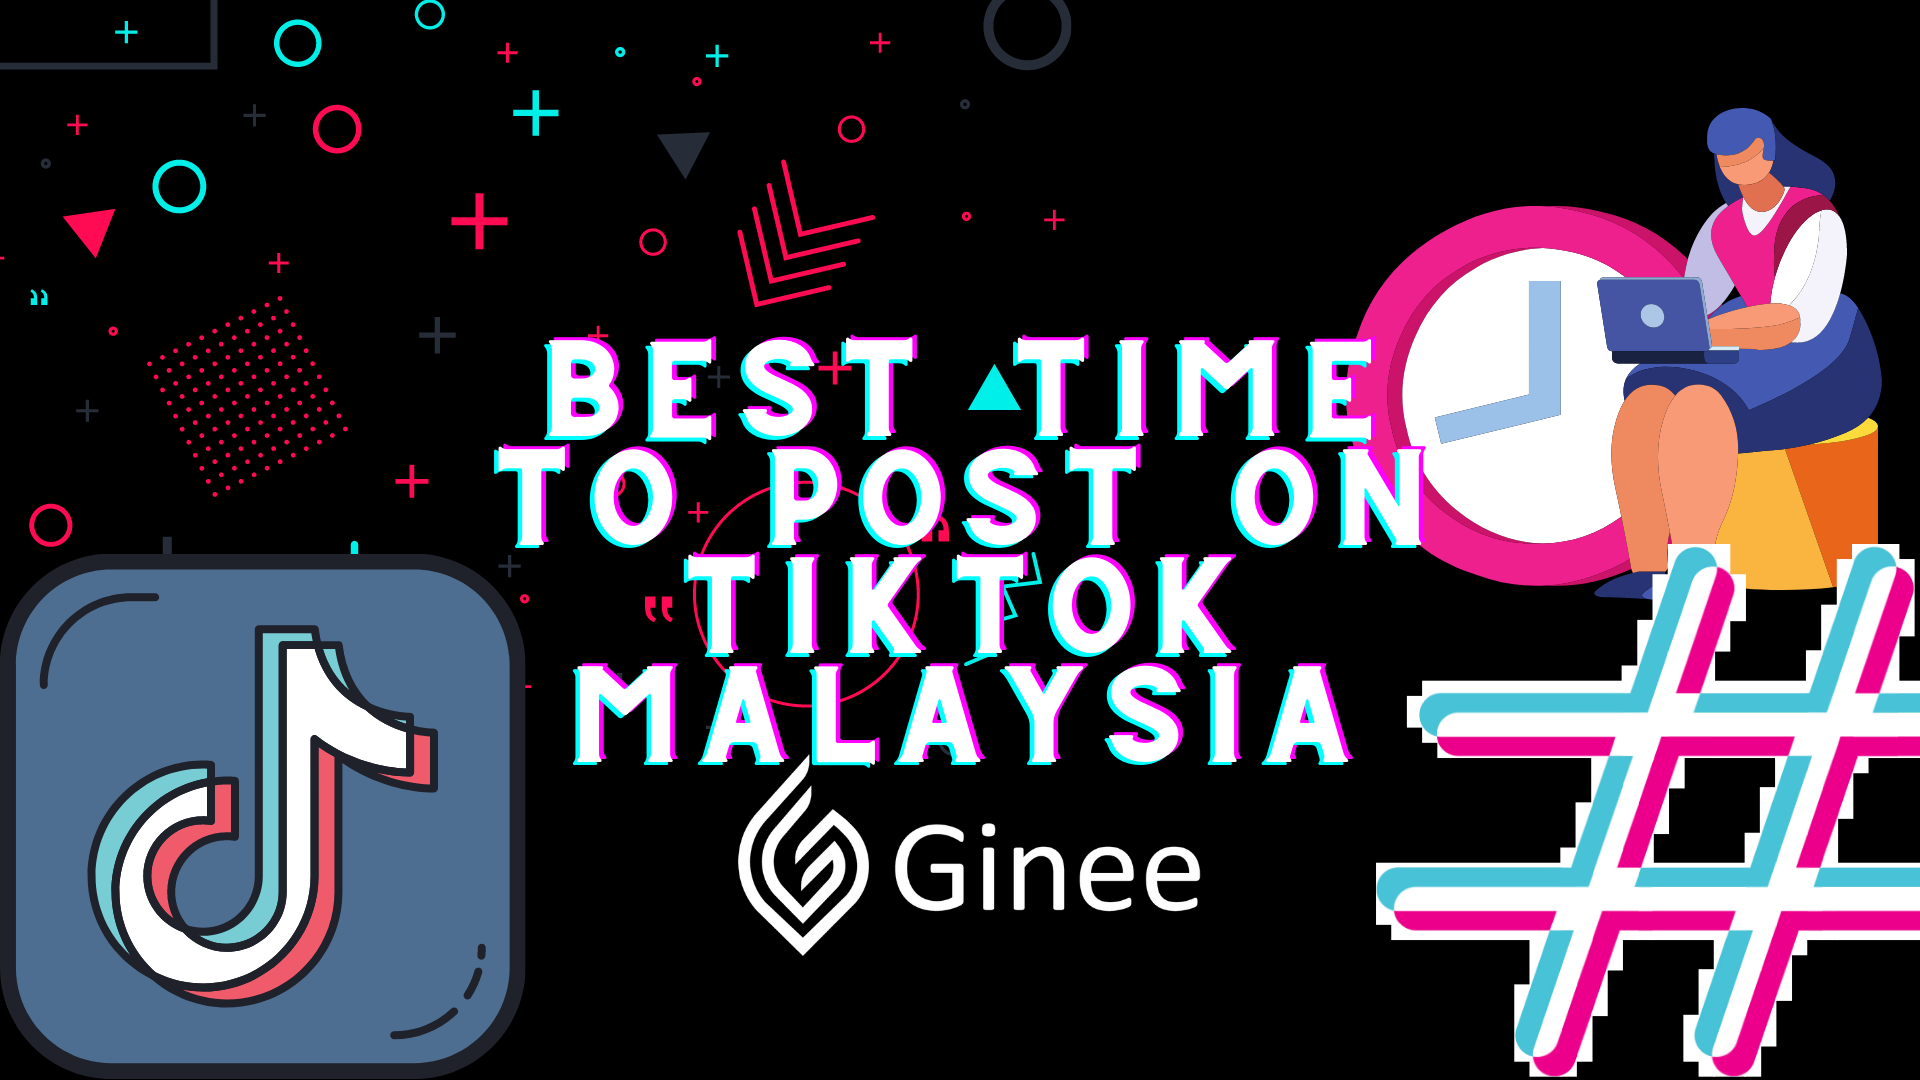 When is The Best Time To Post Contents on TikTok Malaysia? Ginee